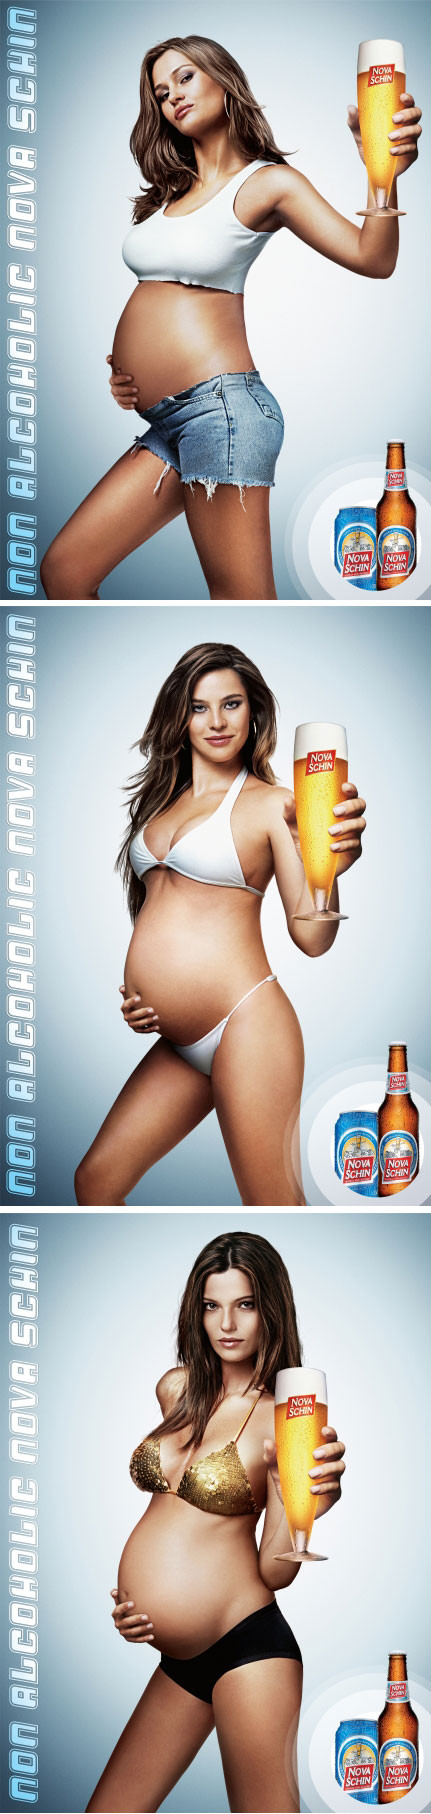 Non-Alcoholic Beer Ad